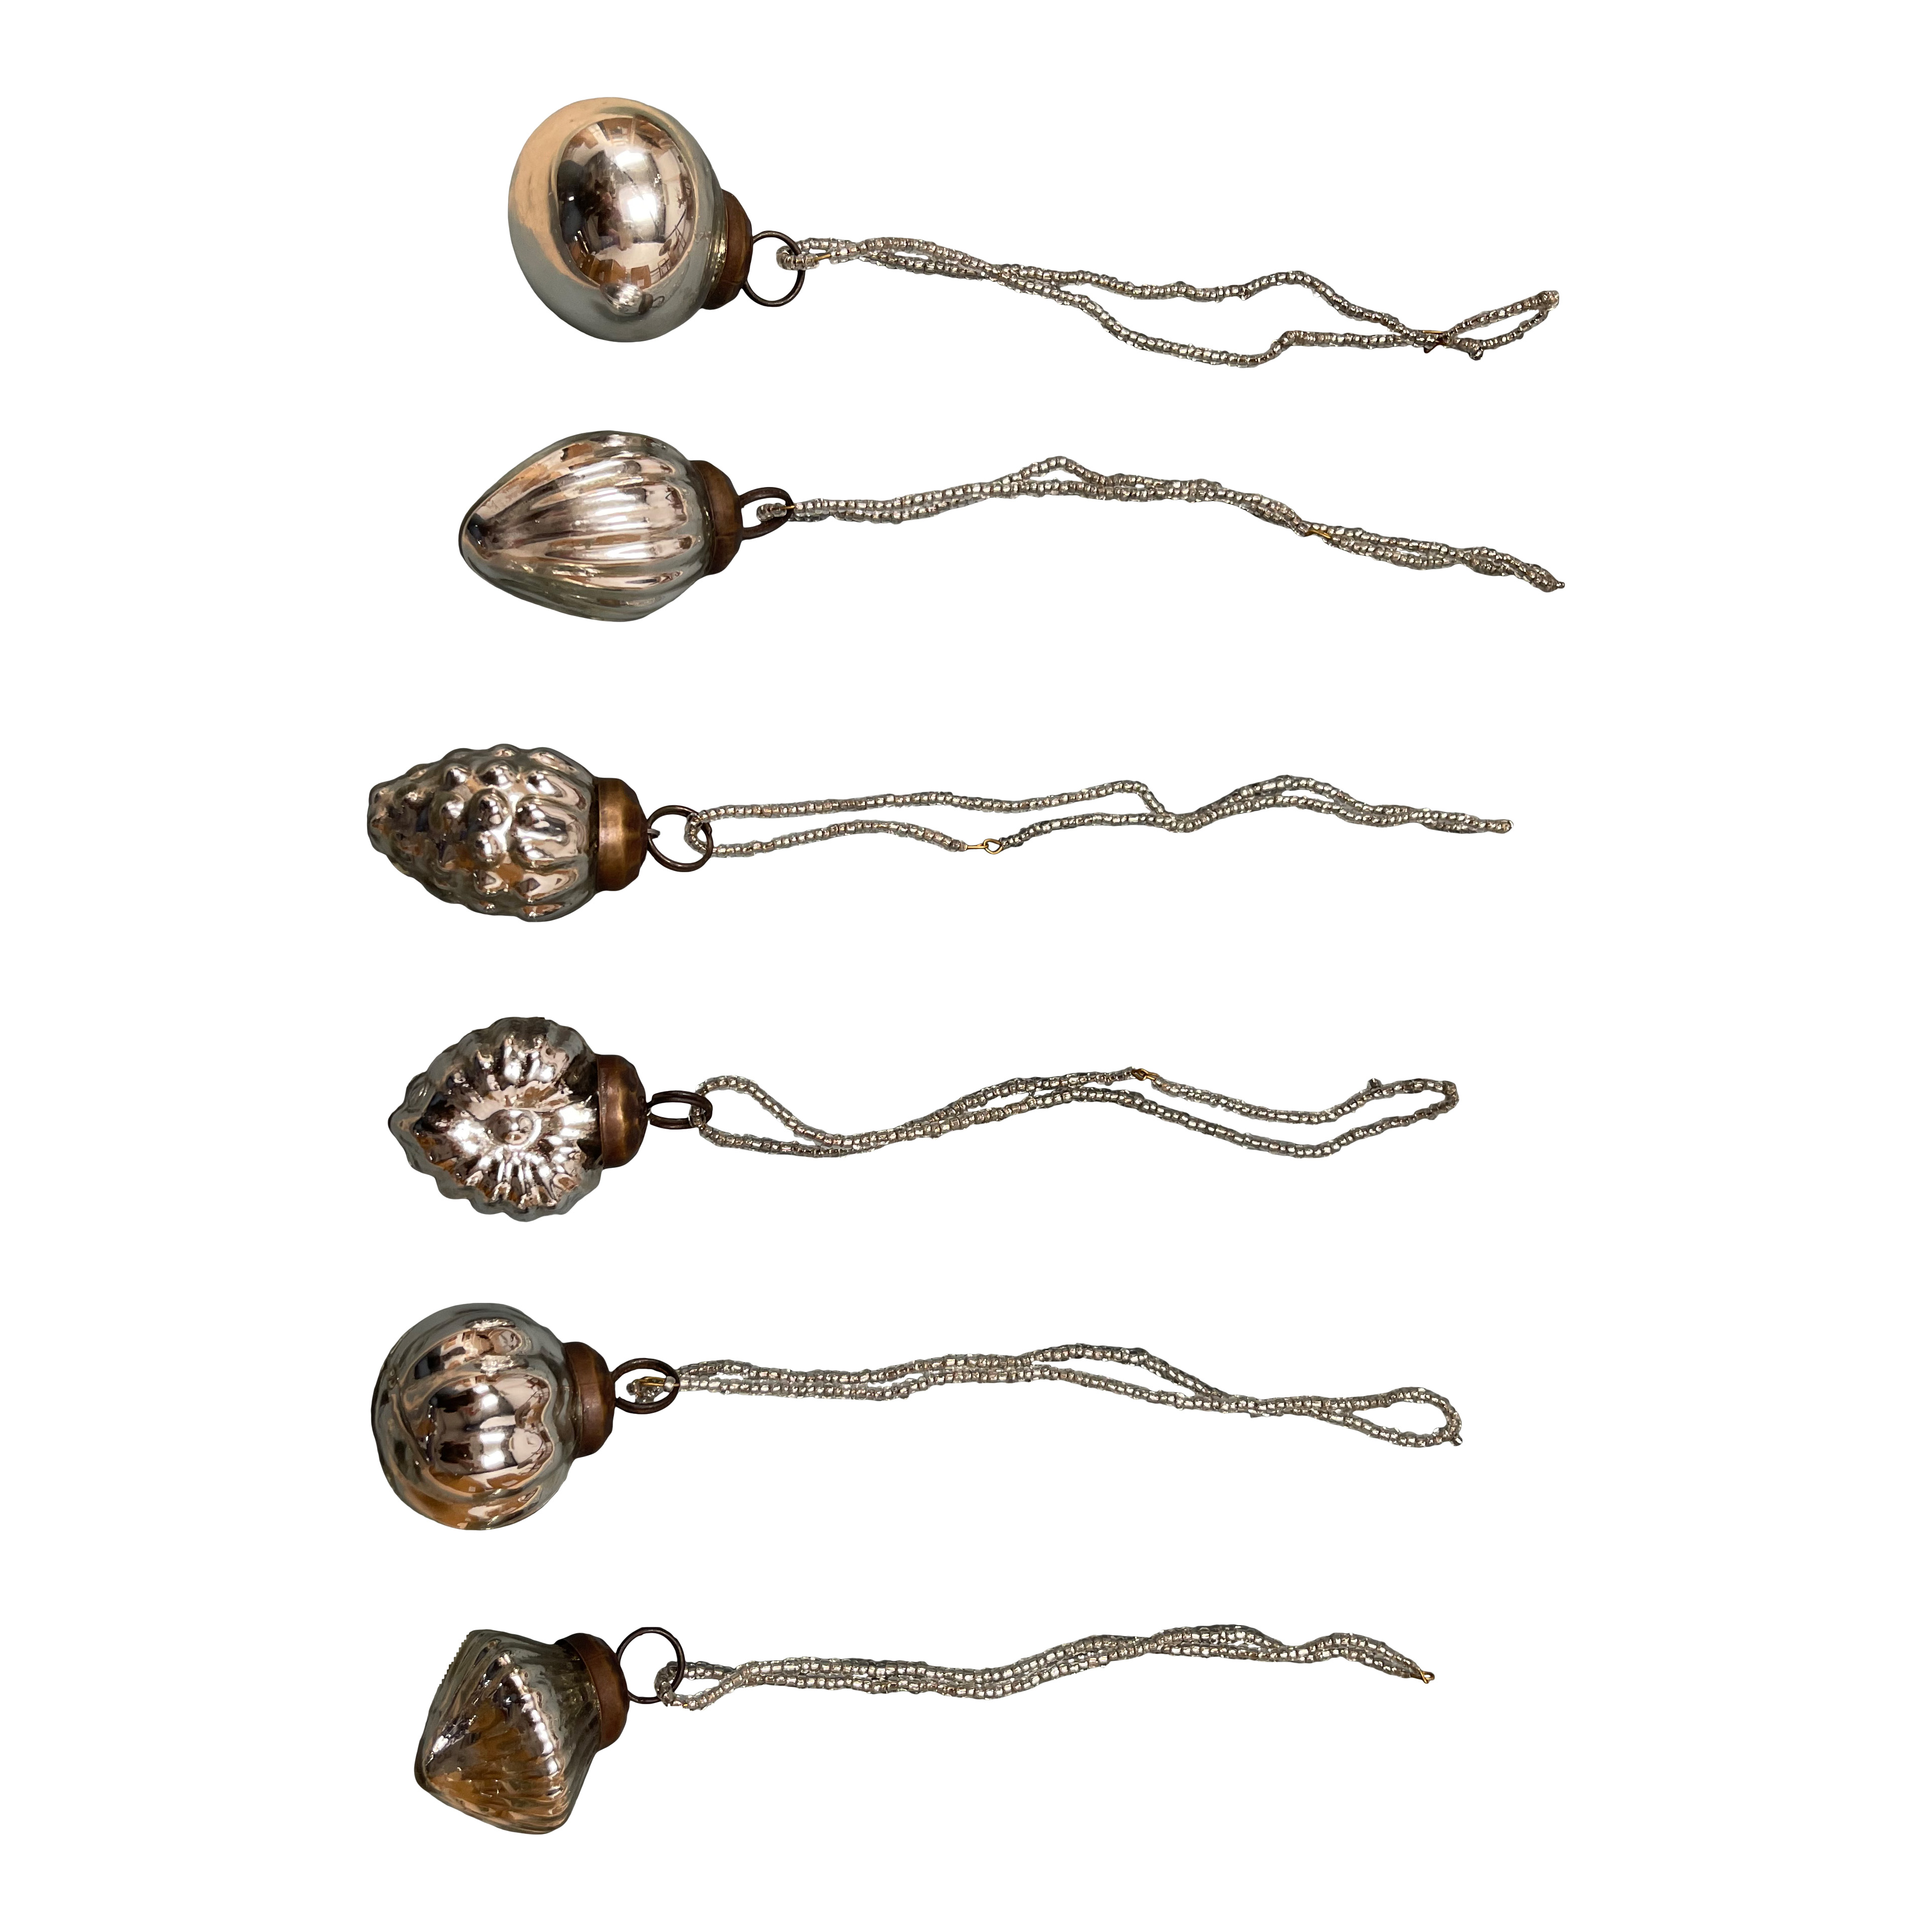 Casa Verde Small Antique Silver Beaded Decorations - Set of 6 Assorted Designs